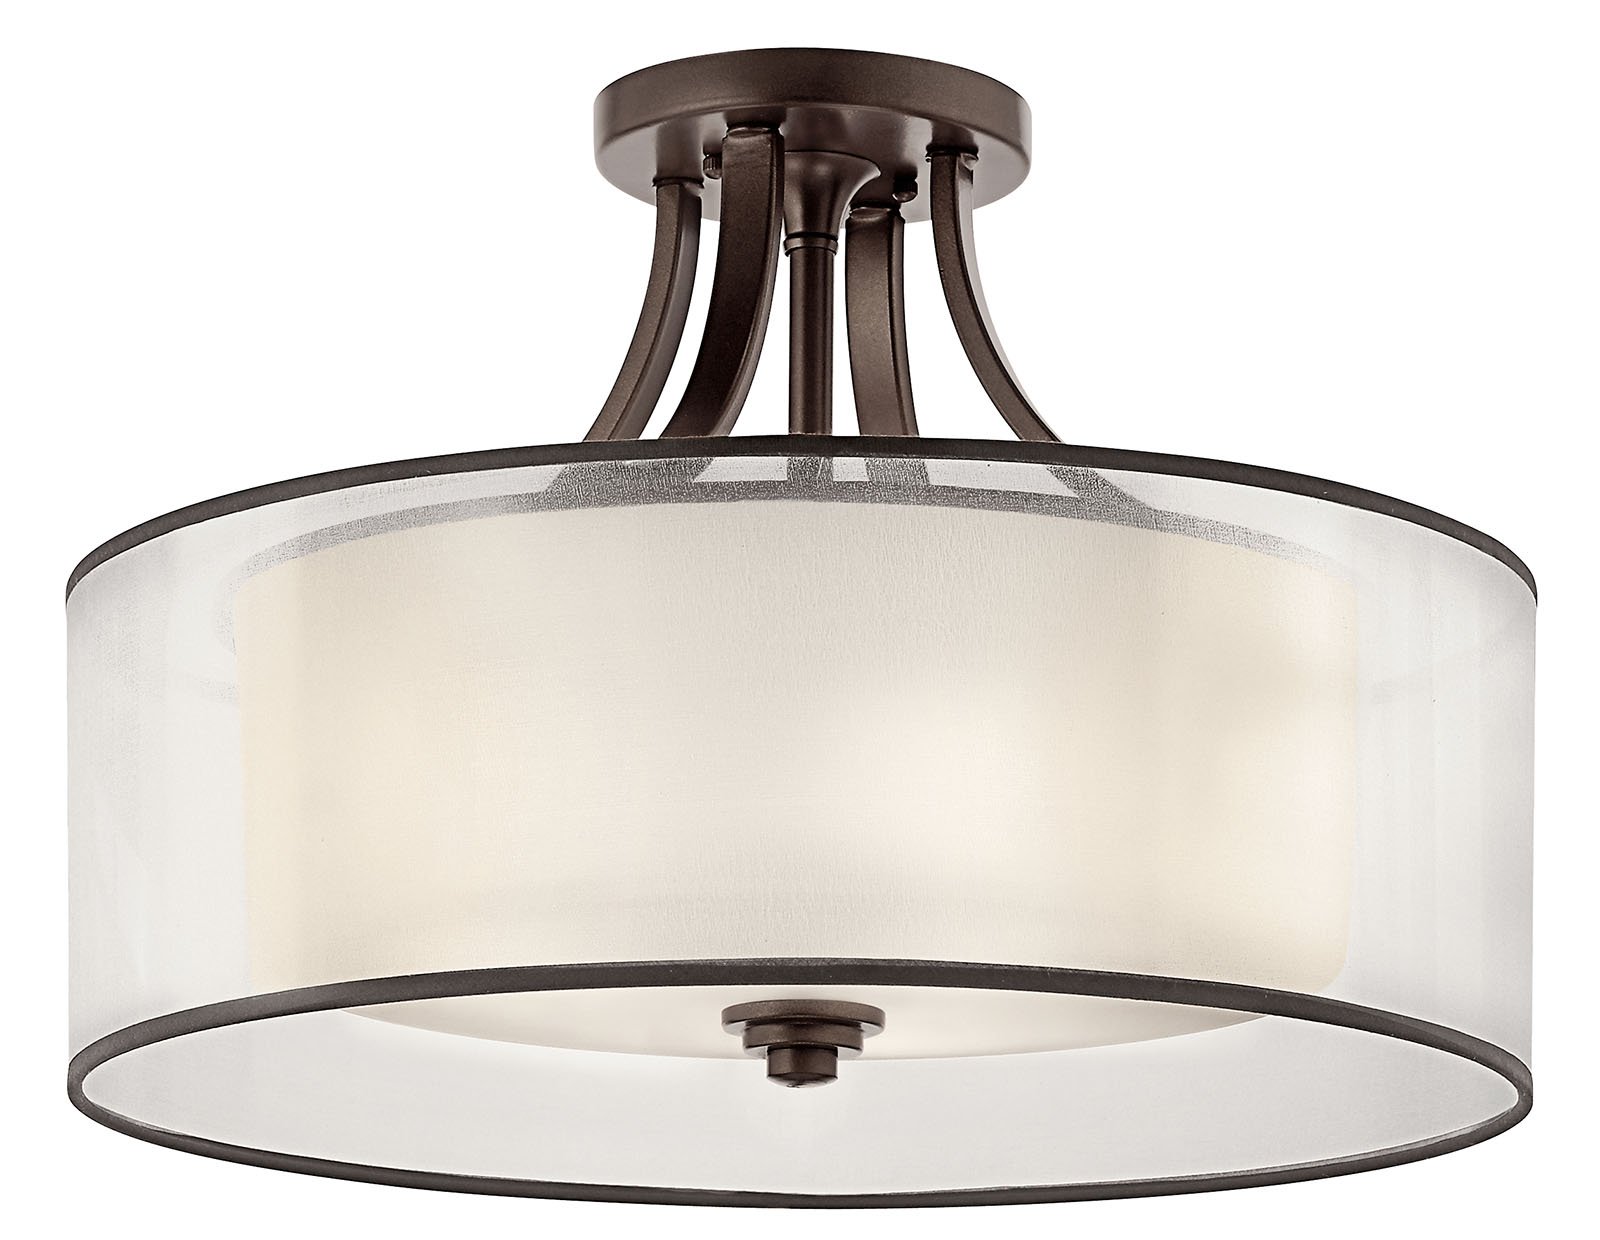 Clean lines and classic styling set this 4 light semi flush ceiling fixture apart. Its Mission Bronze(TM) finish, Light Umber Translucent shade and Satin Etched Glass combine to create a tasteful accent fitting for any space in your home.